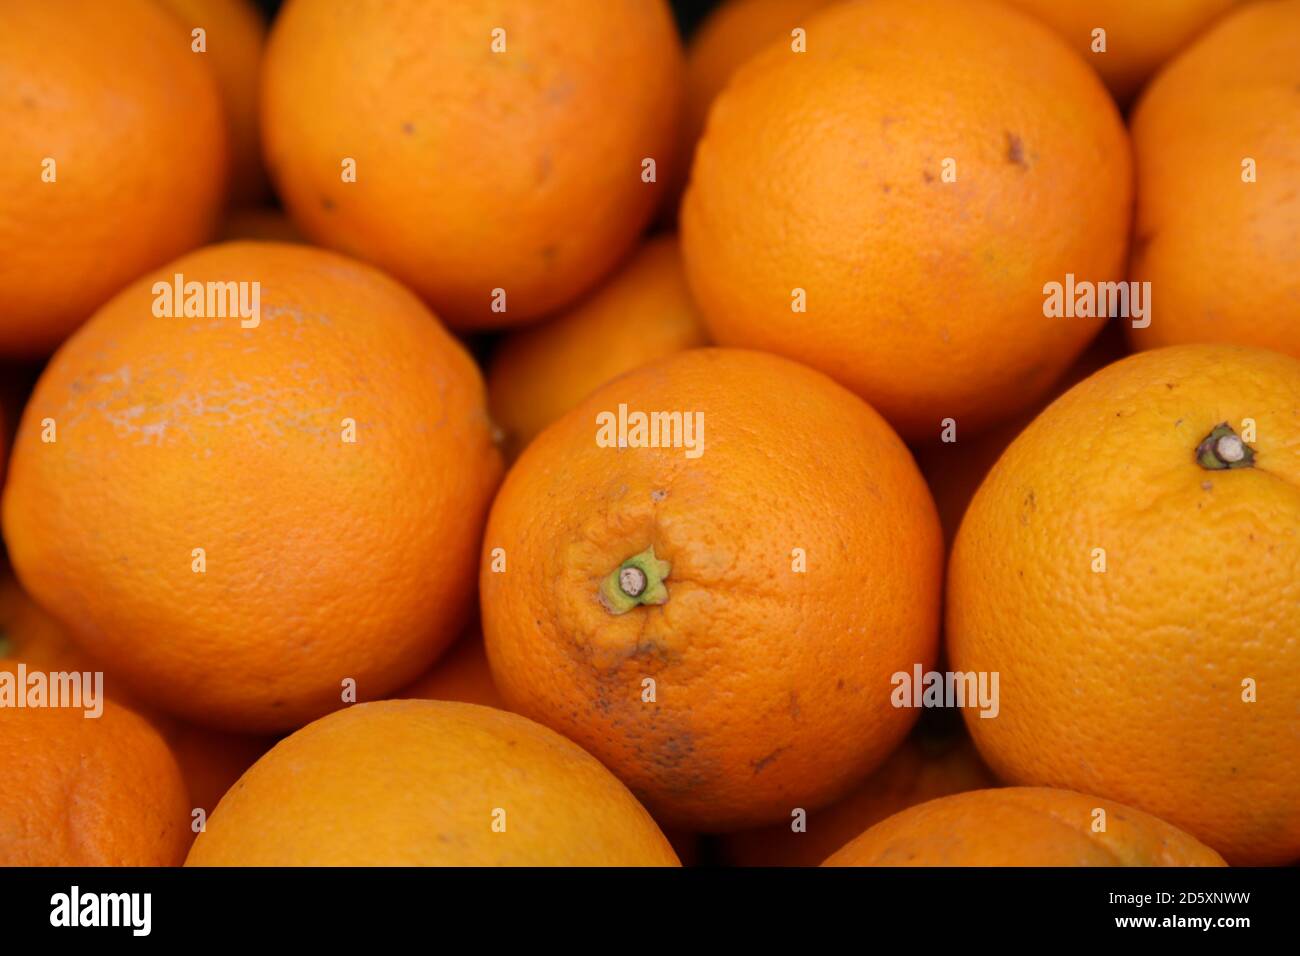 'Vitamin C' This photos was taken at a local farmers market. September 2020 Stock Photo